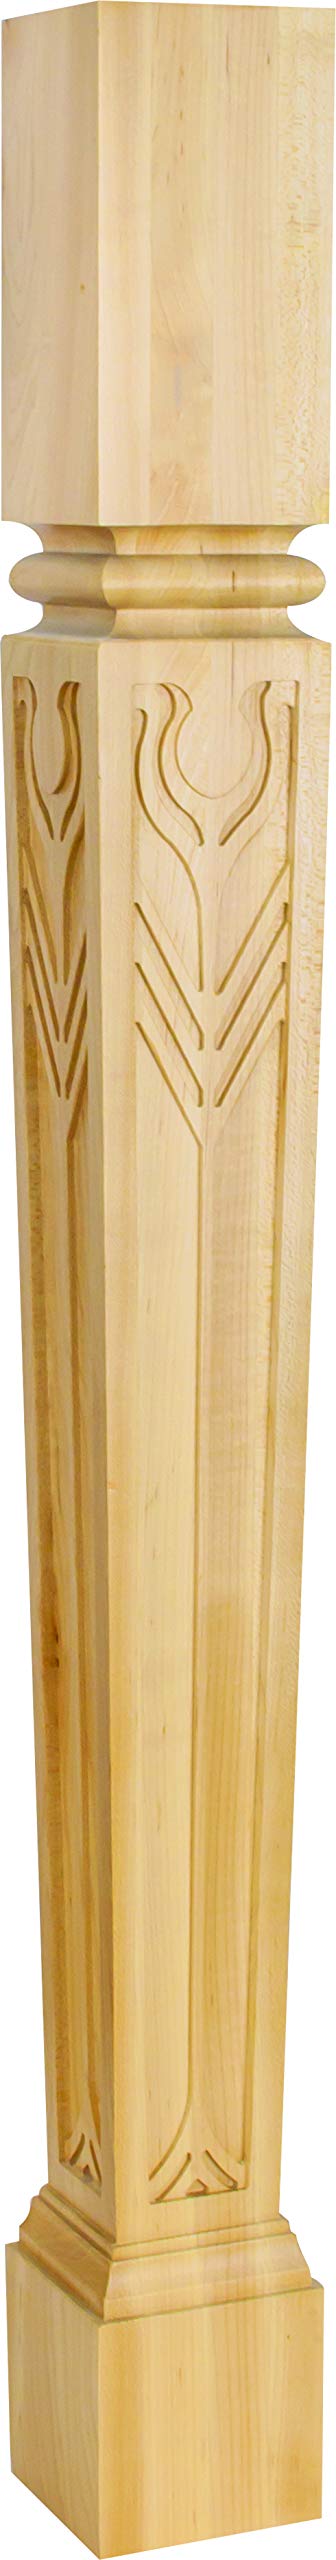 Hardware Resources P64-5-42-HMP 5" W x 5" D x 42" H Rubberwood Tapered Arts & Crafts Post